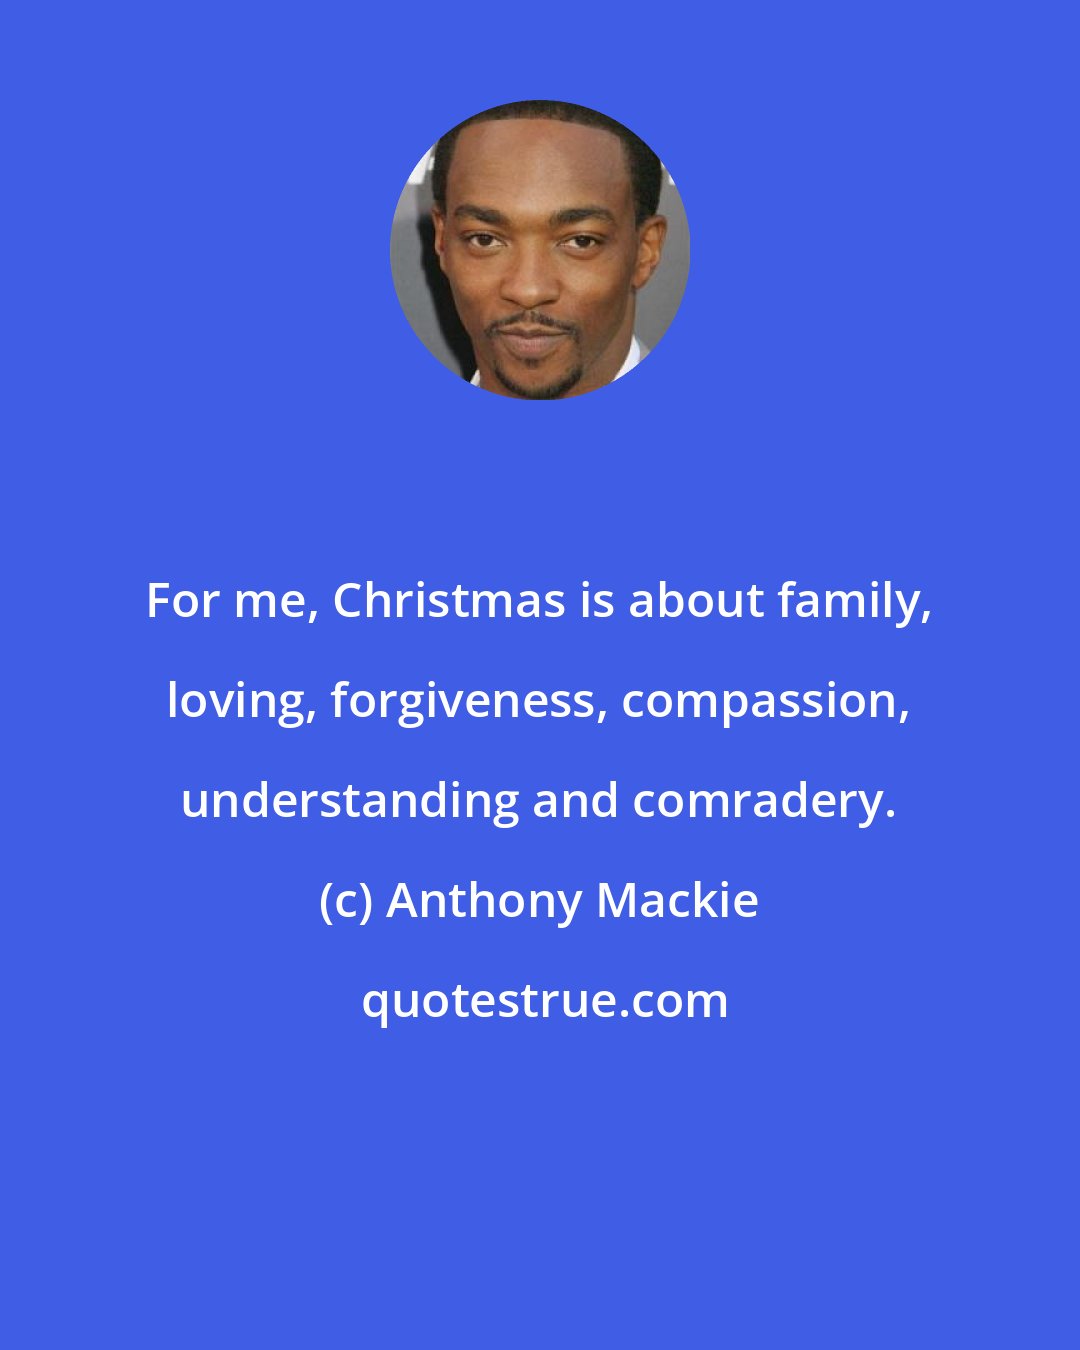 Anthony Mackie: For me, Christmas is about family, loving, forgiveness, compassion, understanding and comradery.